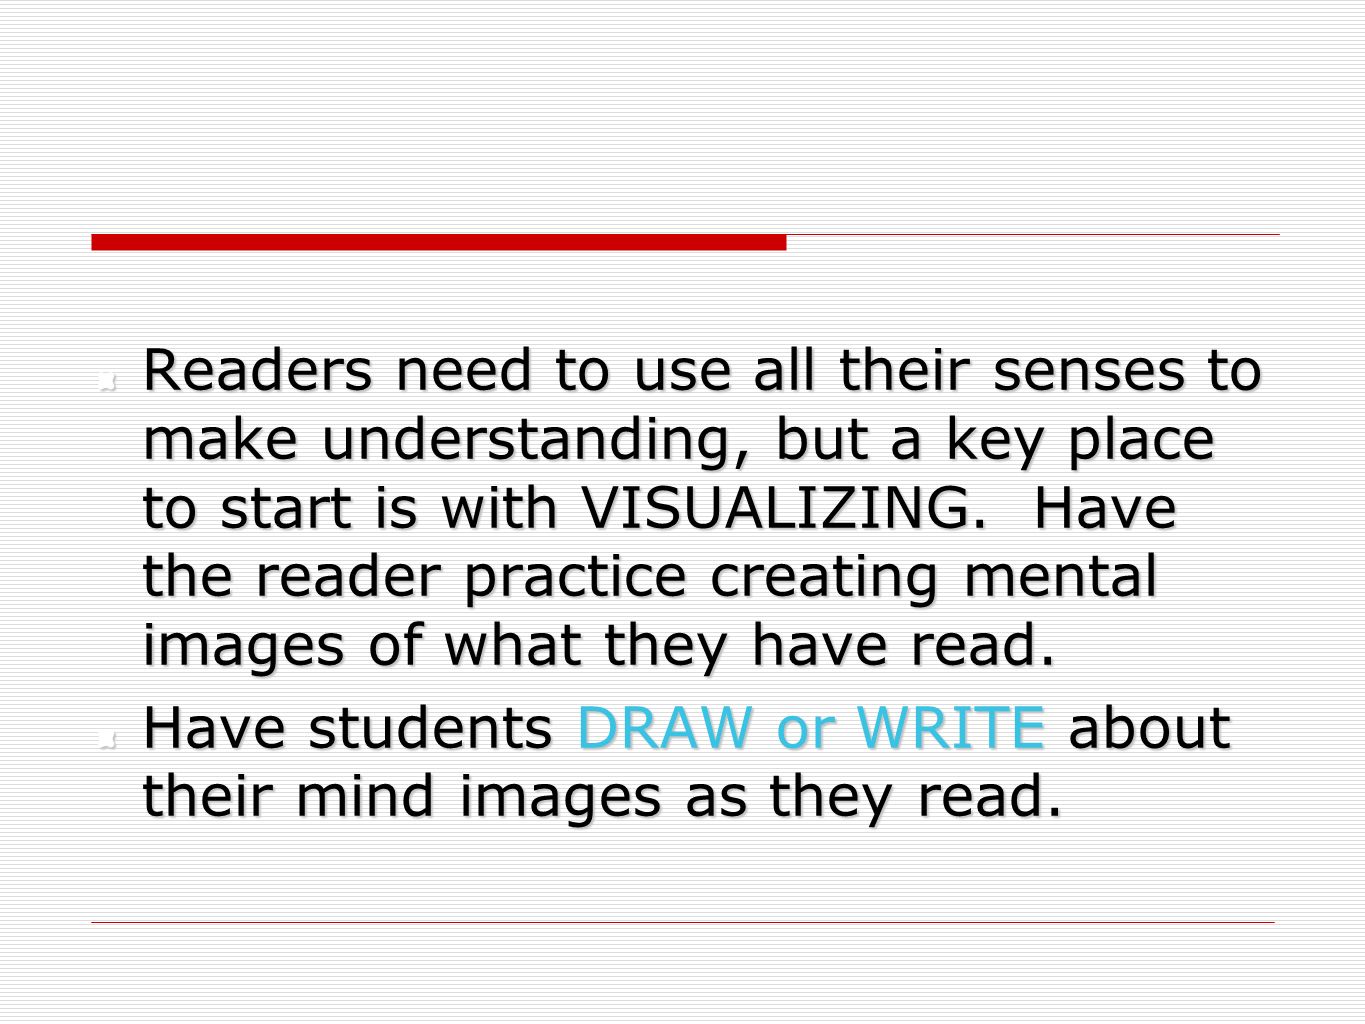 Readers need to use all their senses to make understanding, but a key place to start is with VISUALIZING. Have the reader practice creating mental images of what they have read.